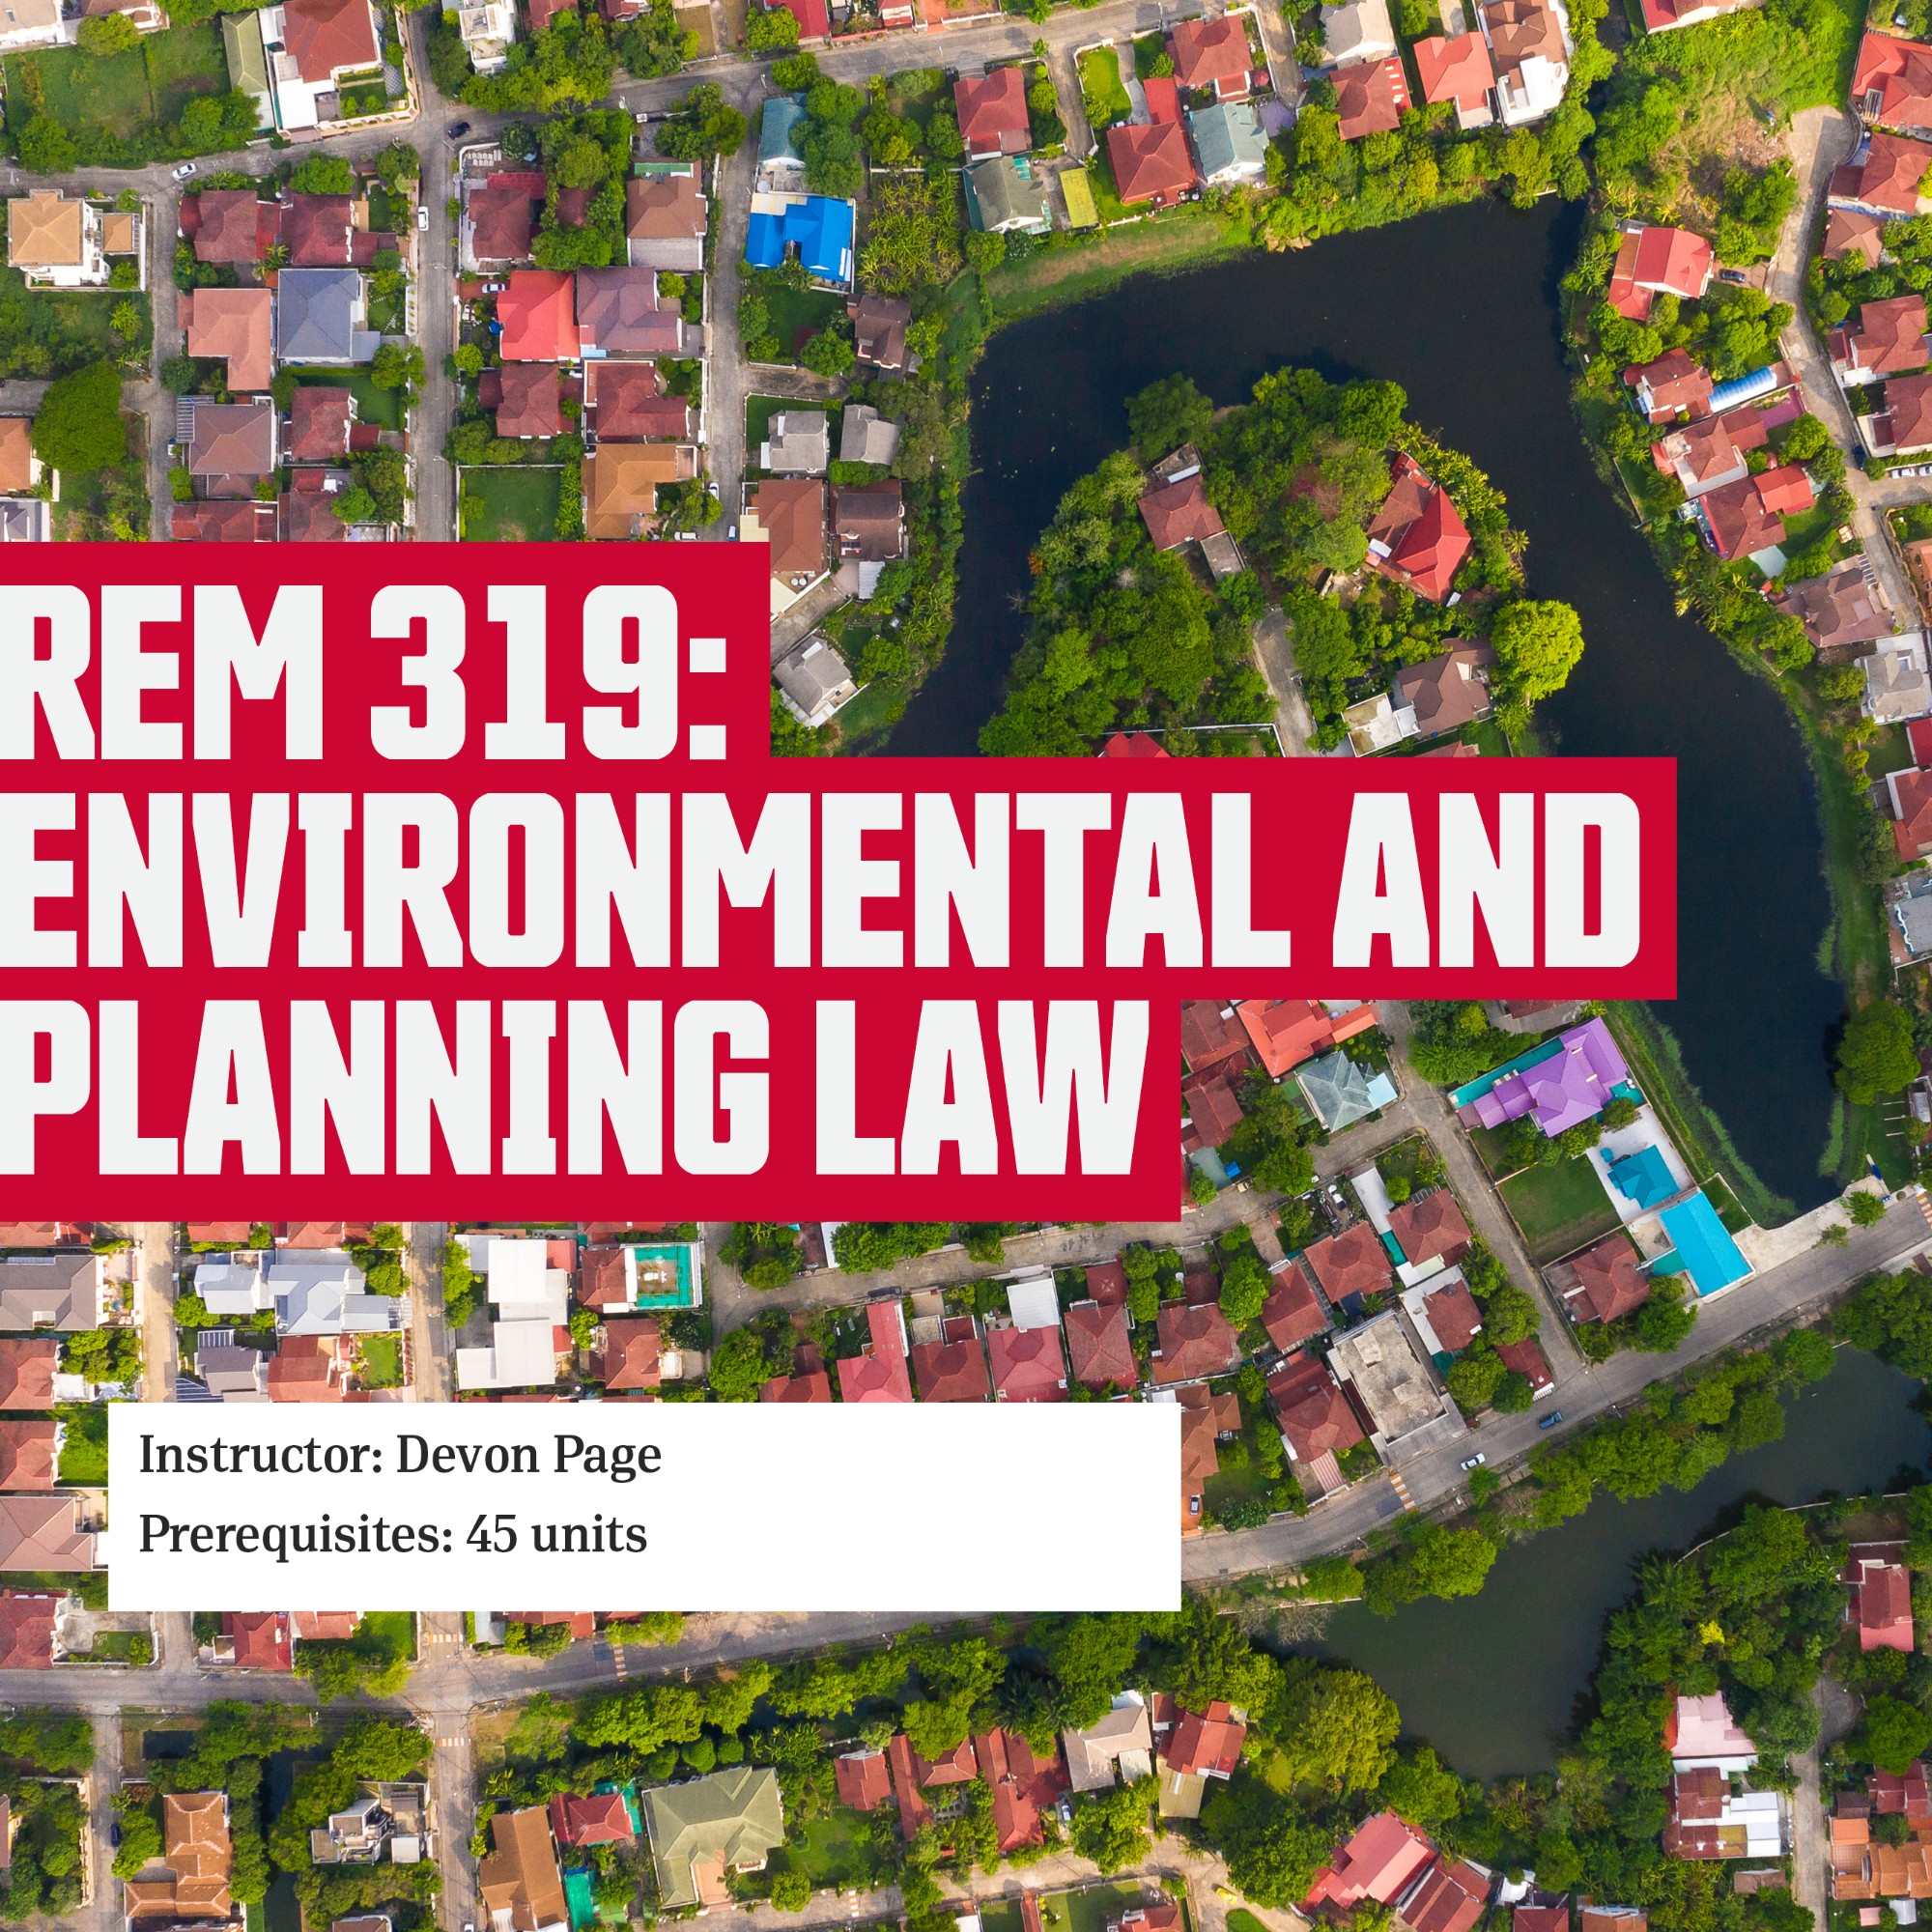 REM 319: Environmental and planning law